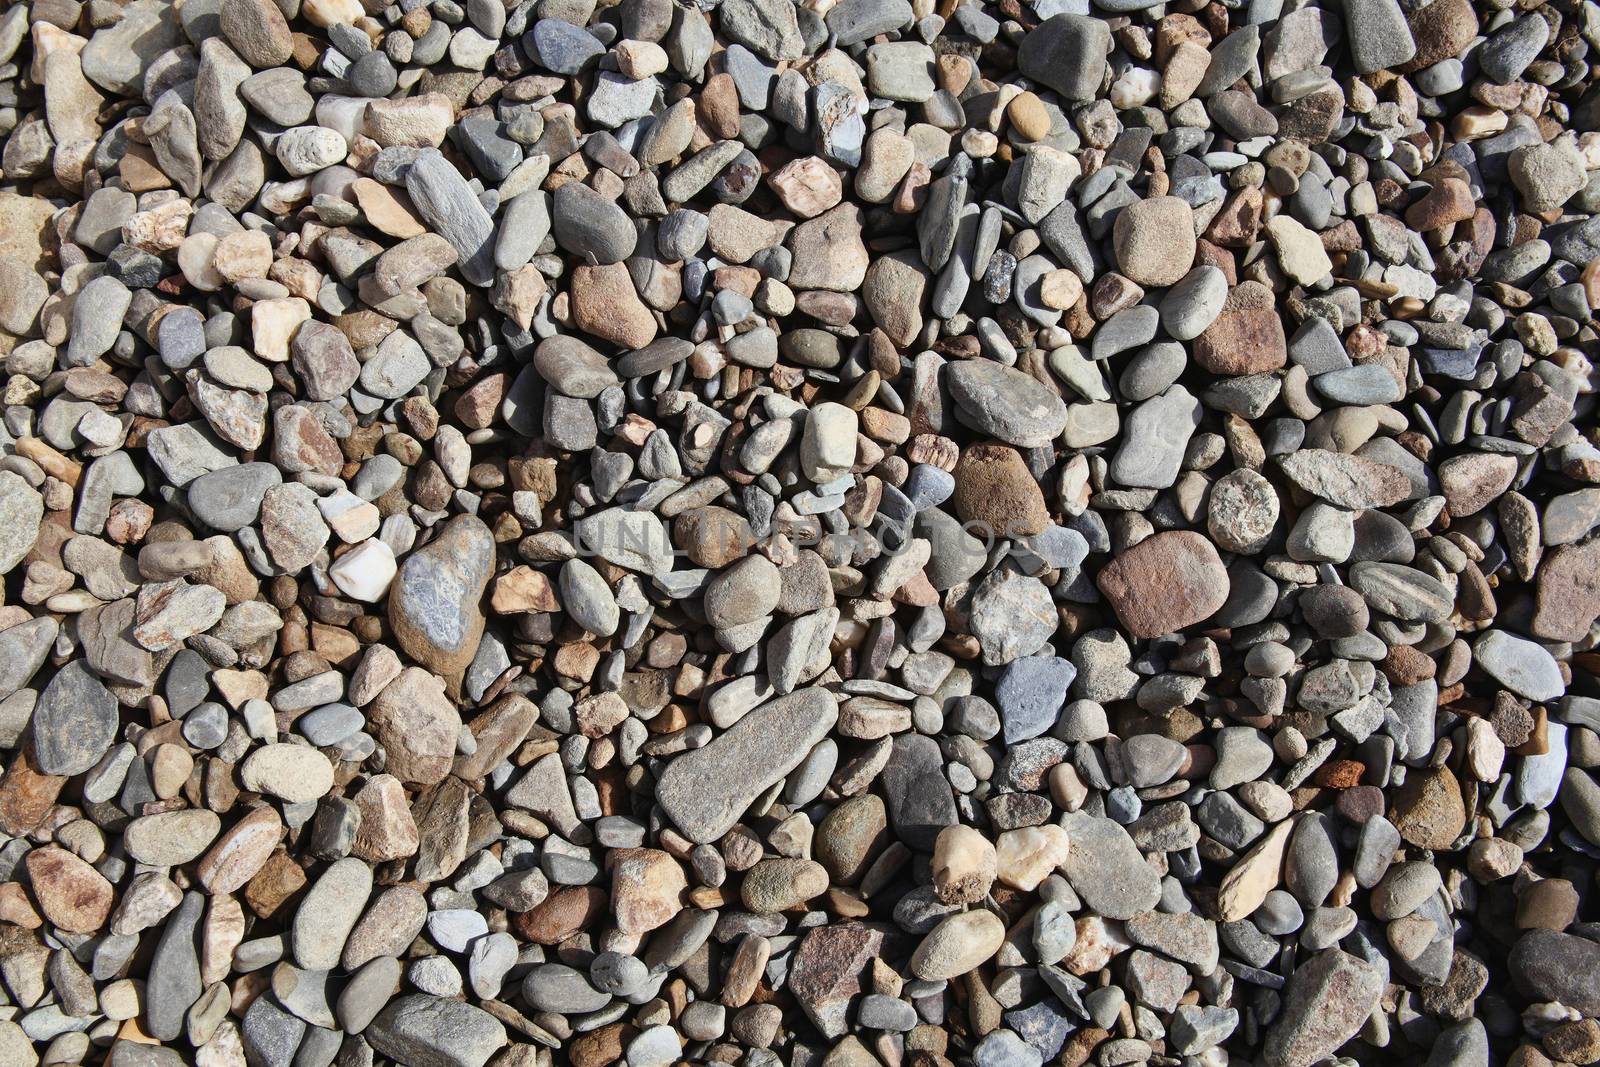 Background texture of rock pebble stones used for landscaping stock photo